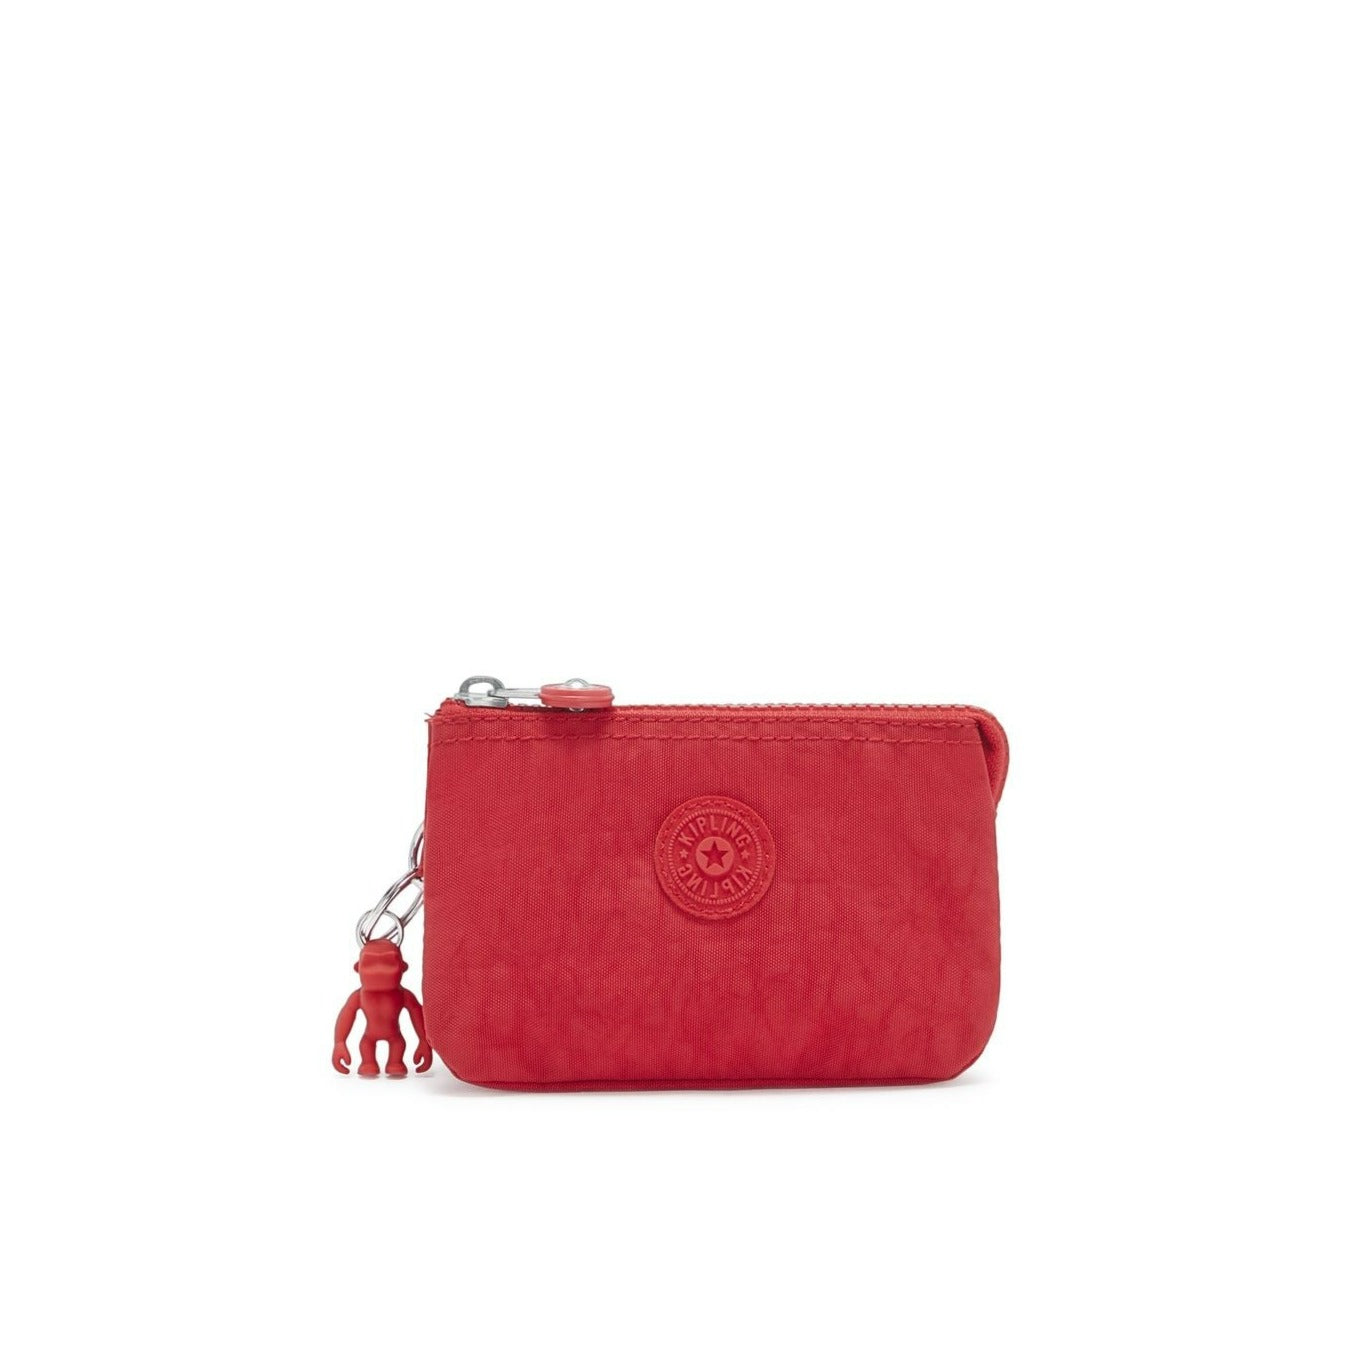 Kipling Creativity S Small Purse in Red Rouge